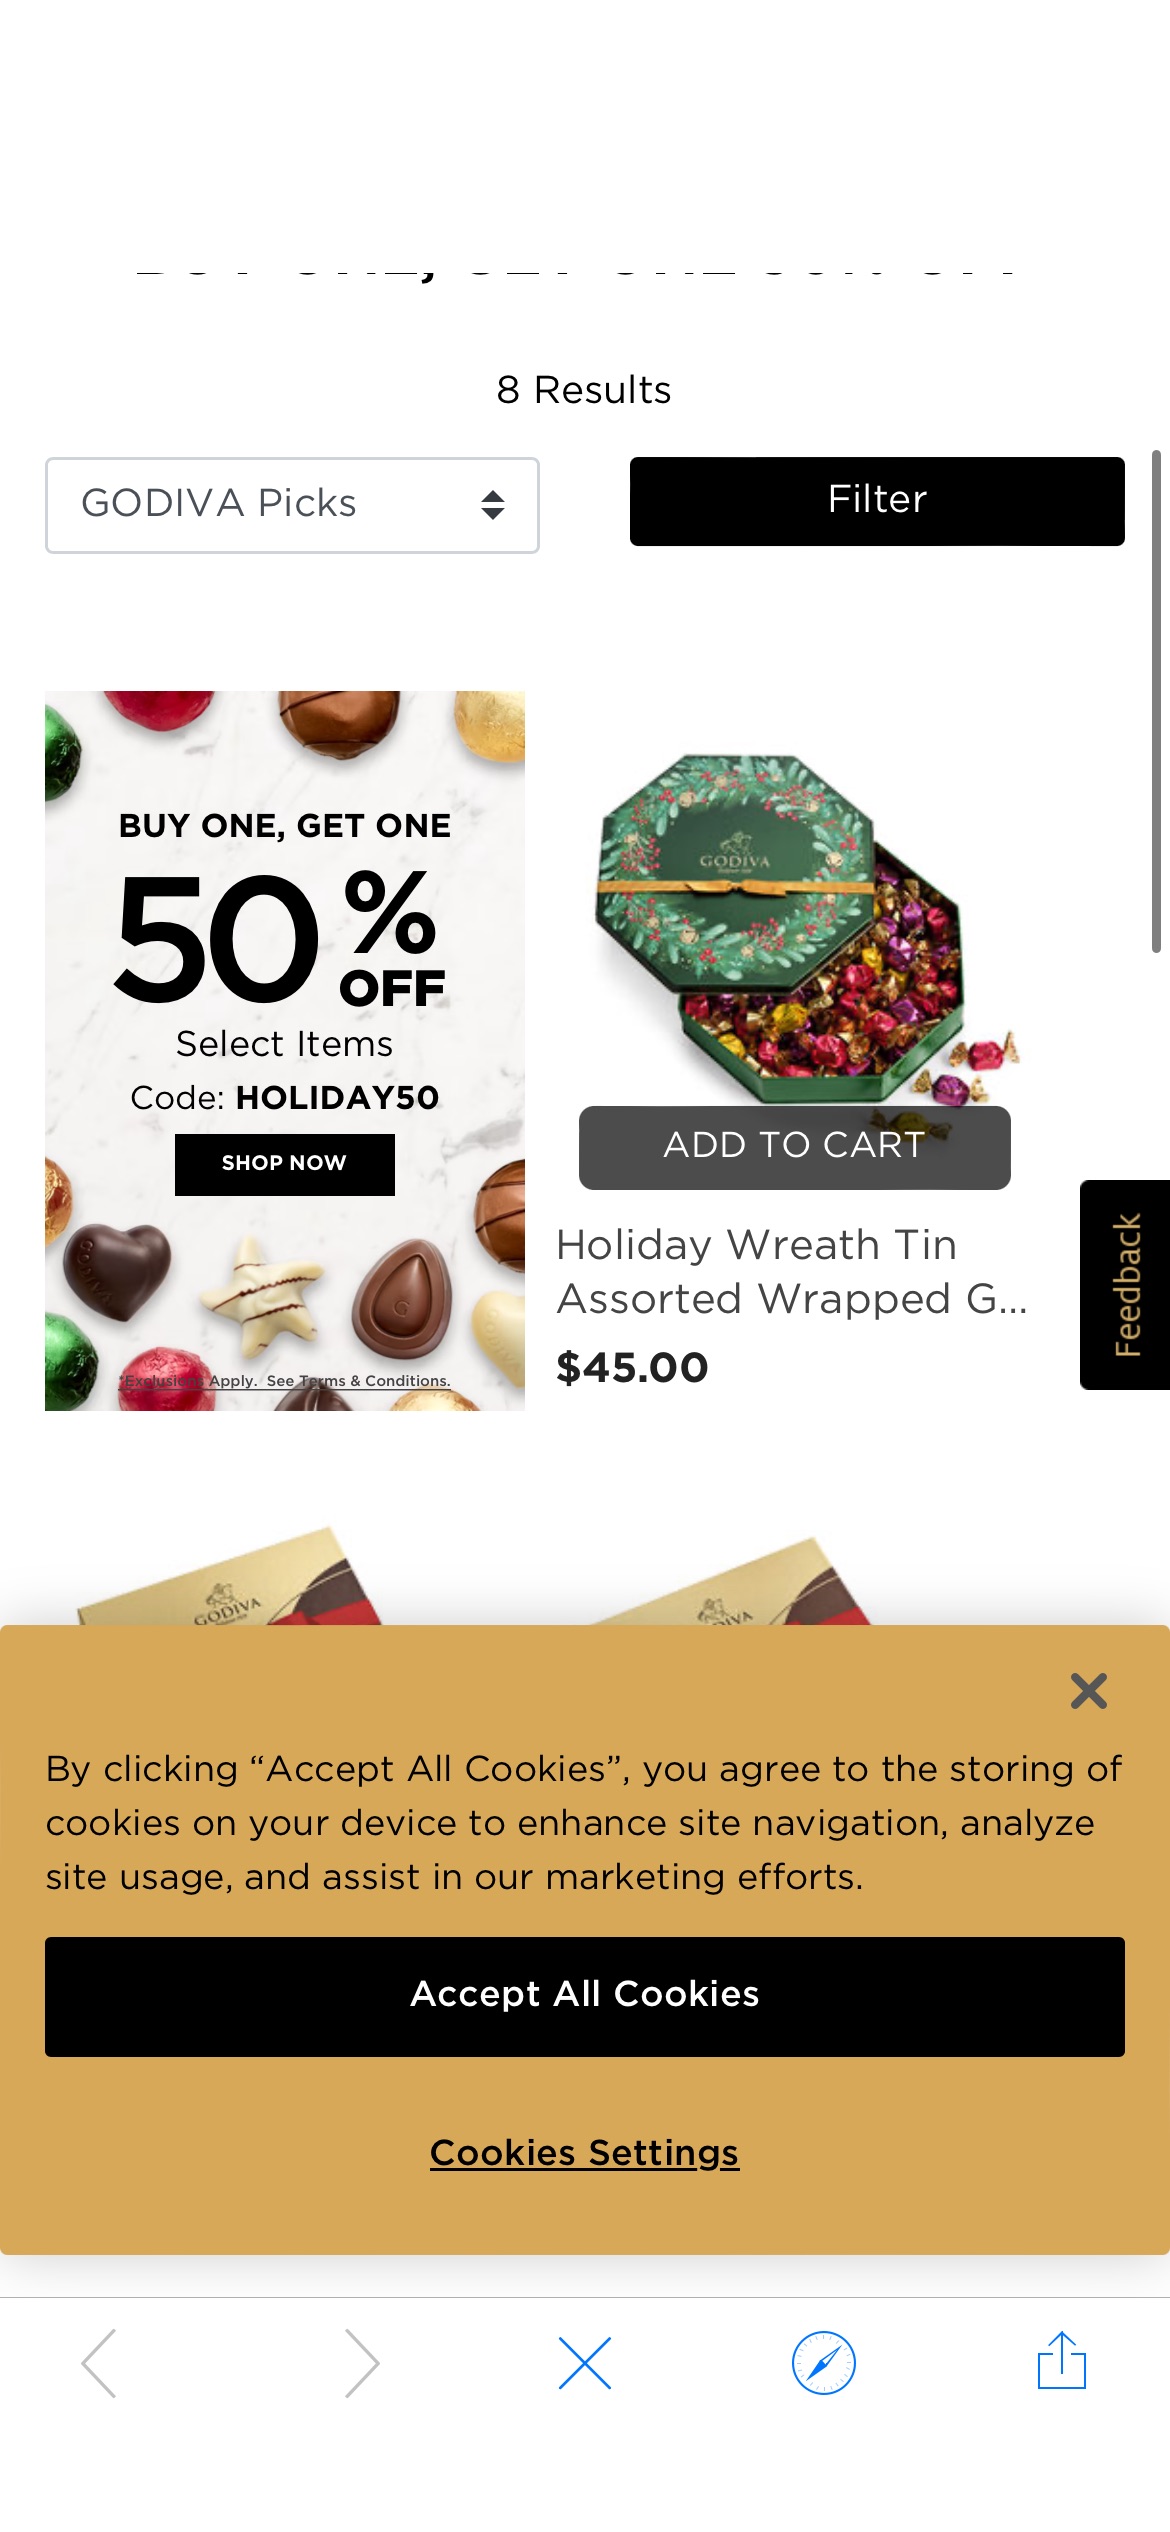 Limited-Time Offers & Promotions on Select Chocolate | GODIVA BOG50%